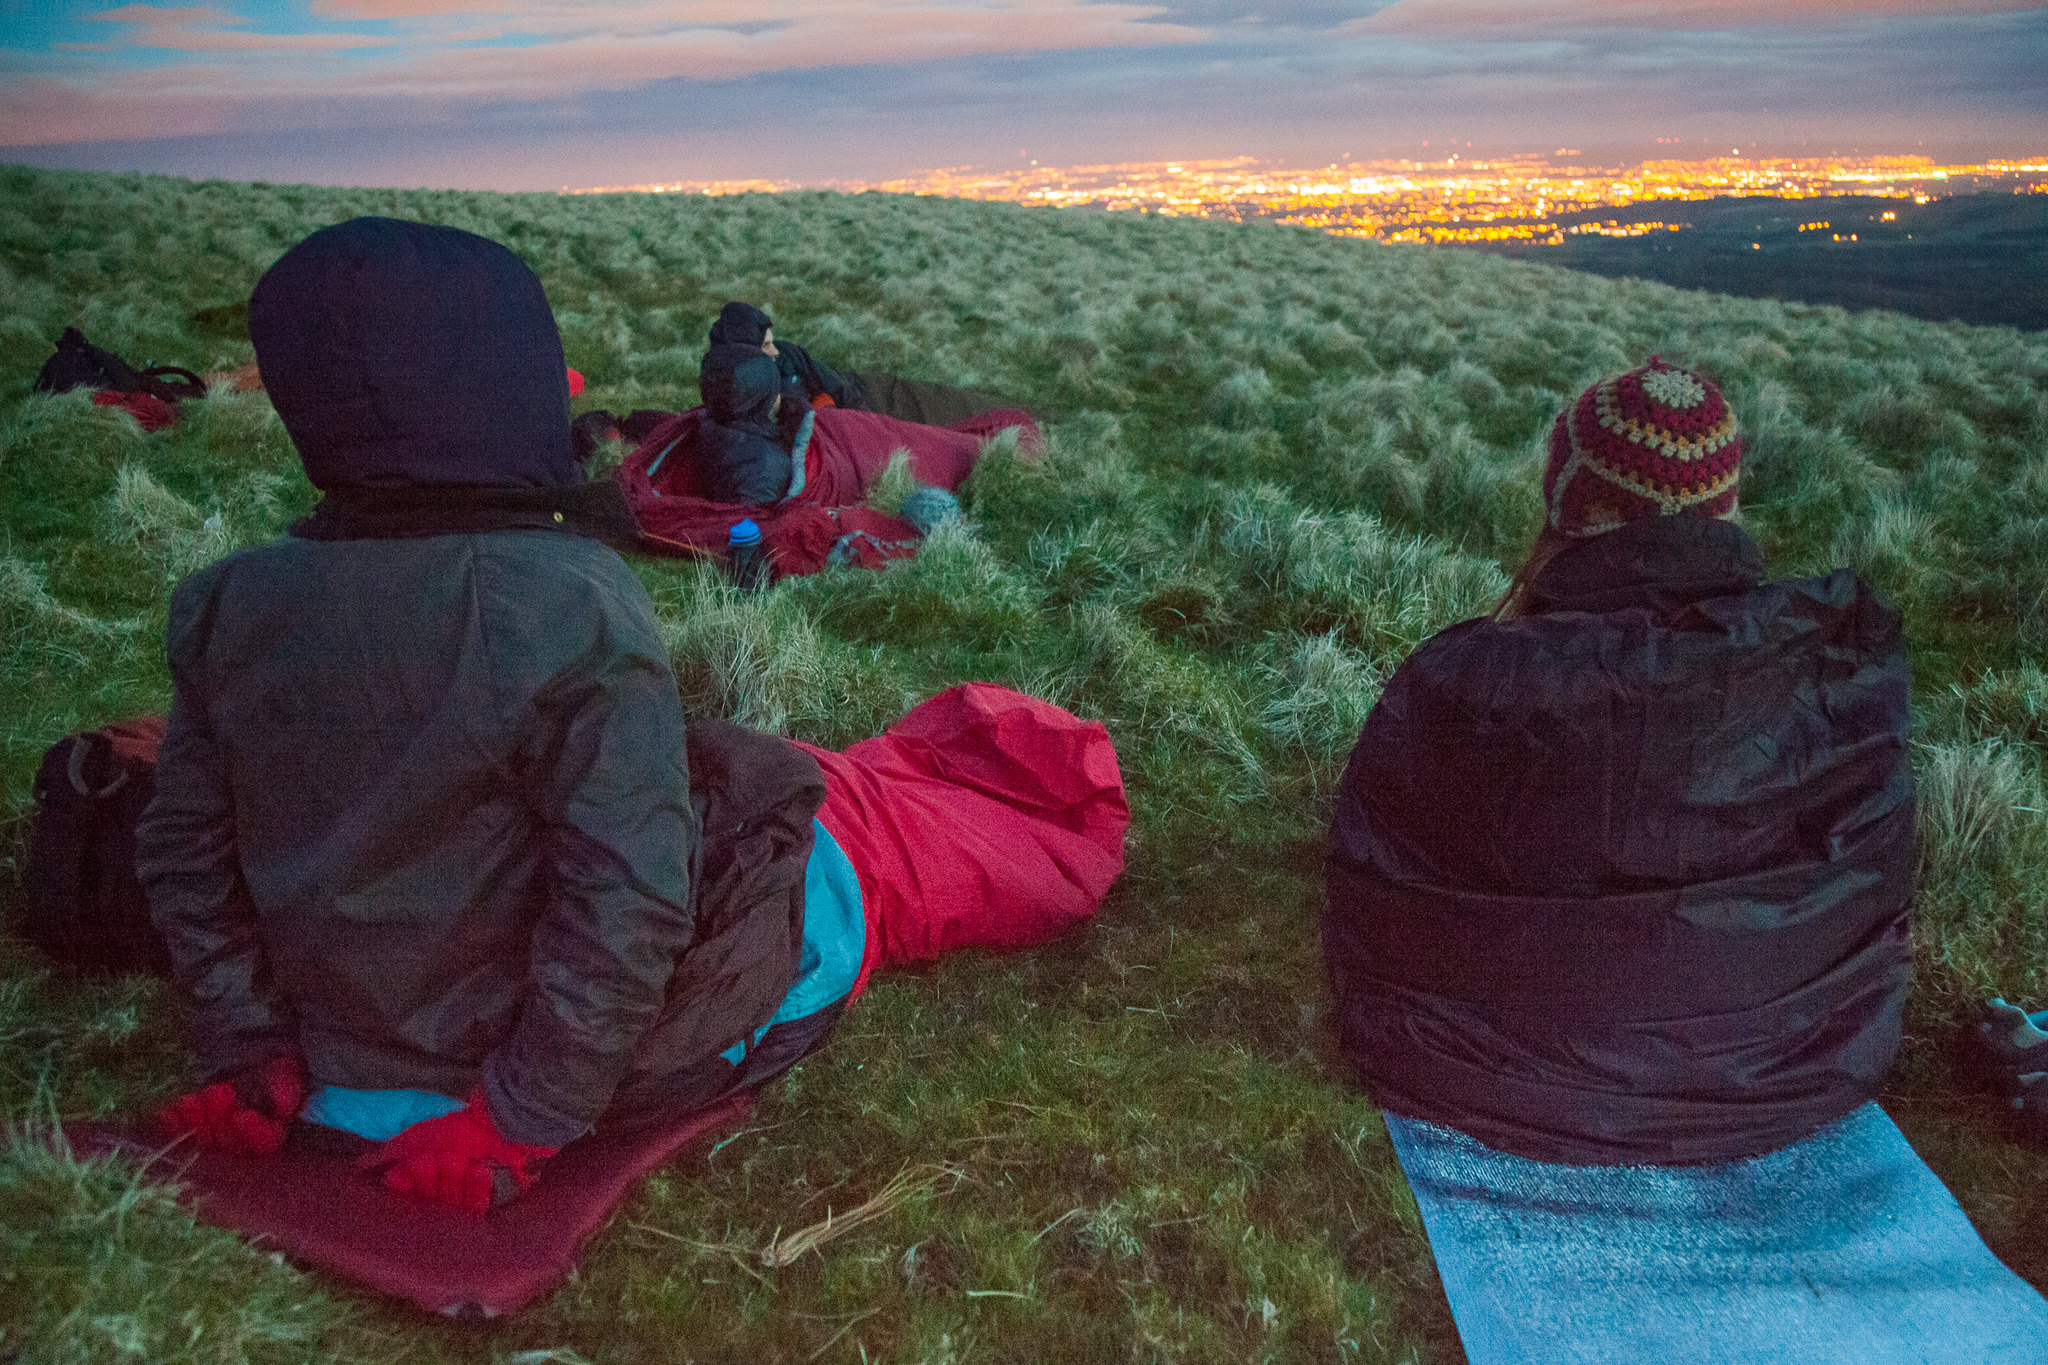 A group of people in sleeping bags on top of a hill, gazing at the illuminated city below.